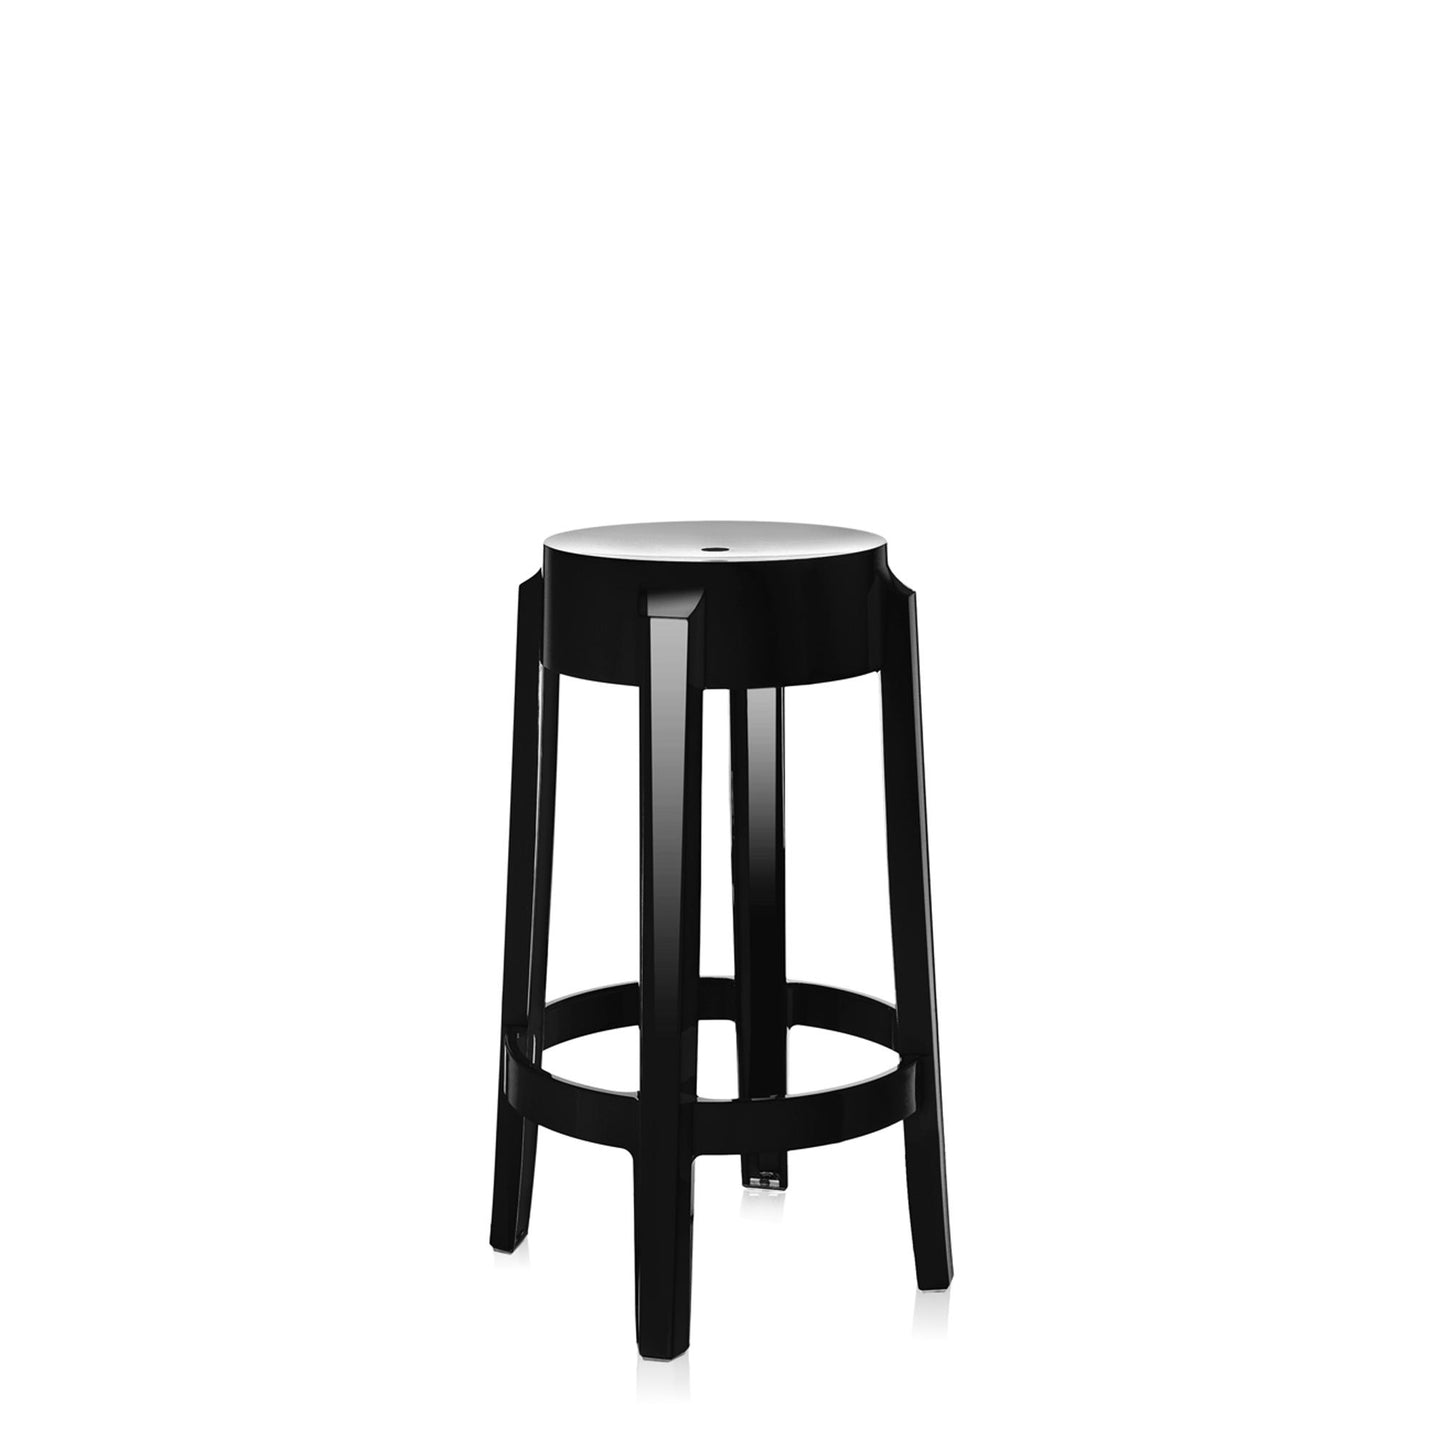 Charles Ghost Bar Stool H65 by Kartell #Glossy Black